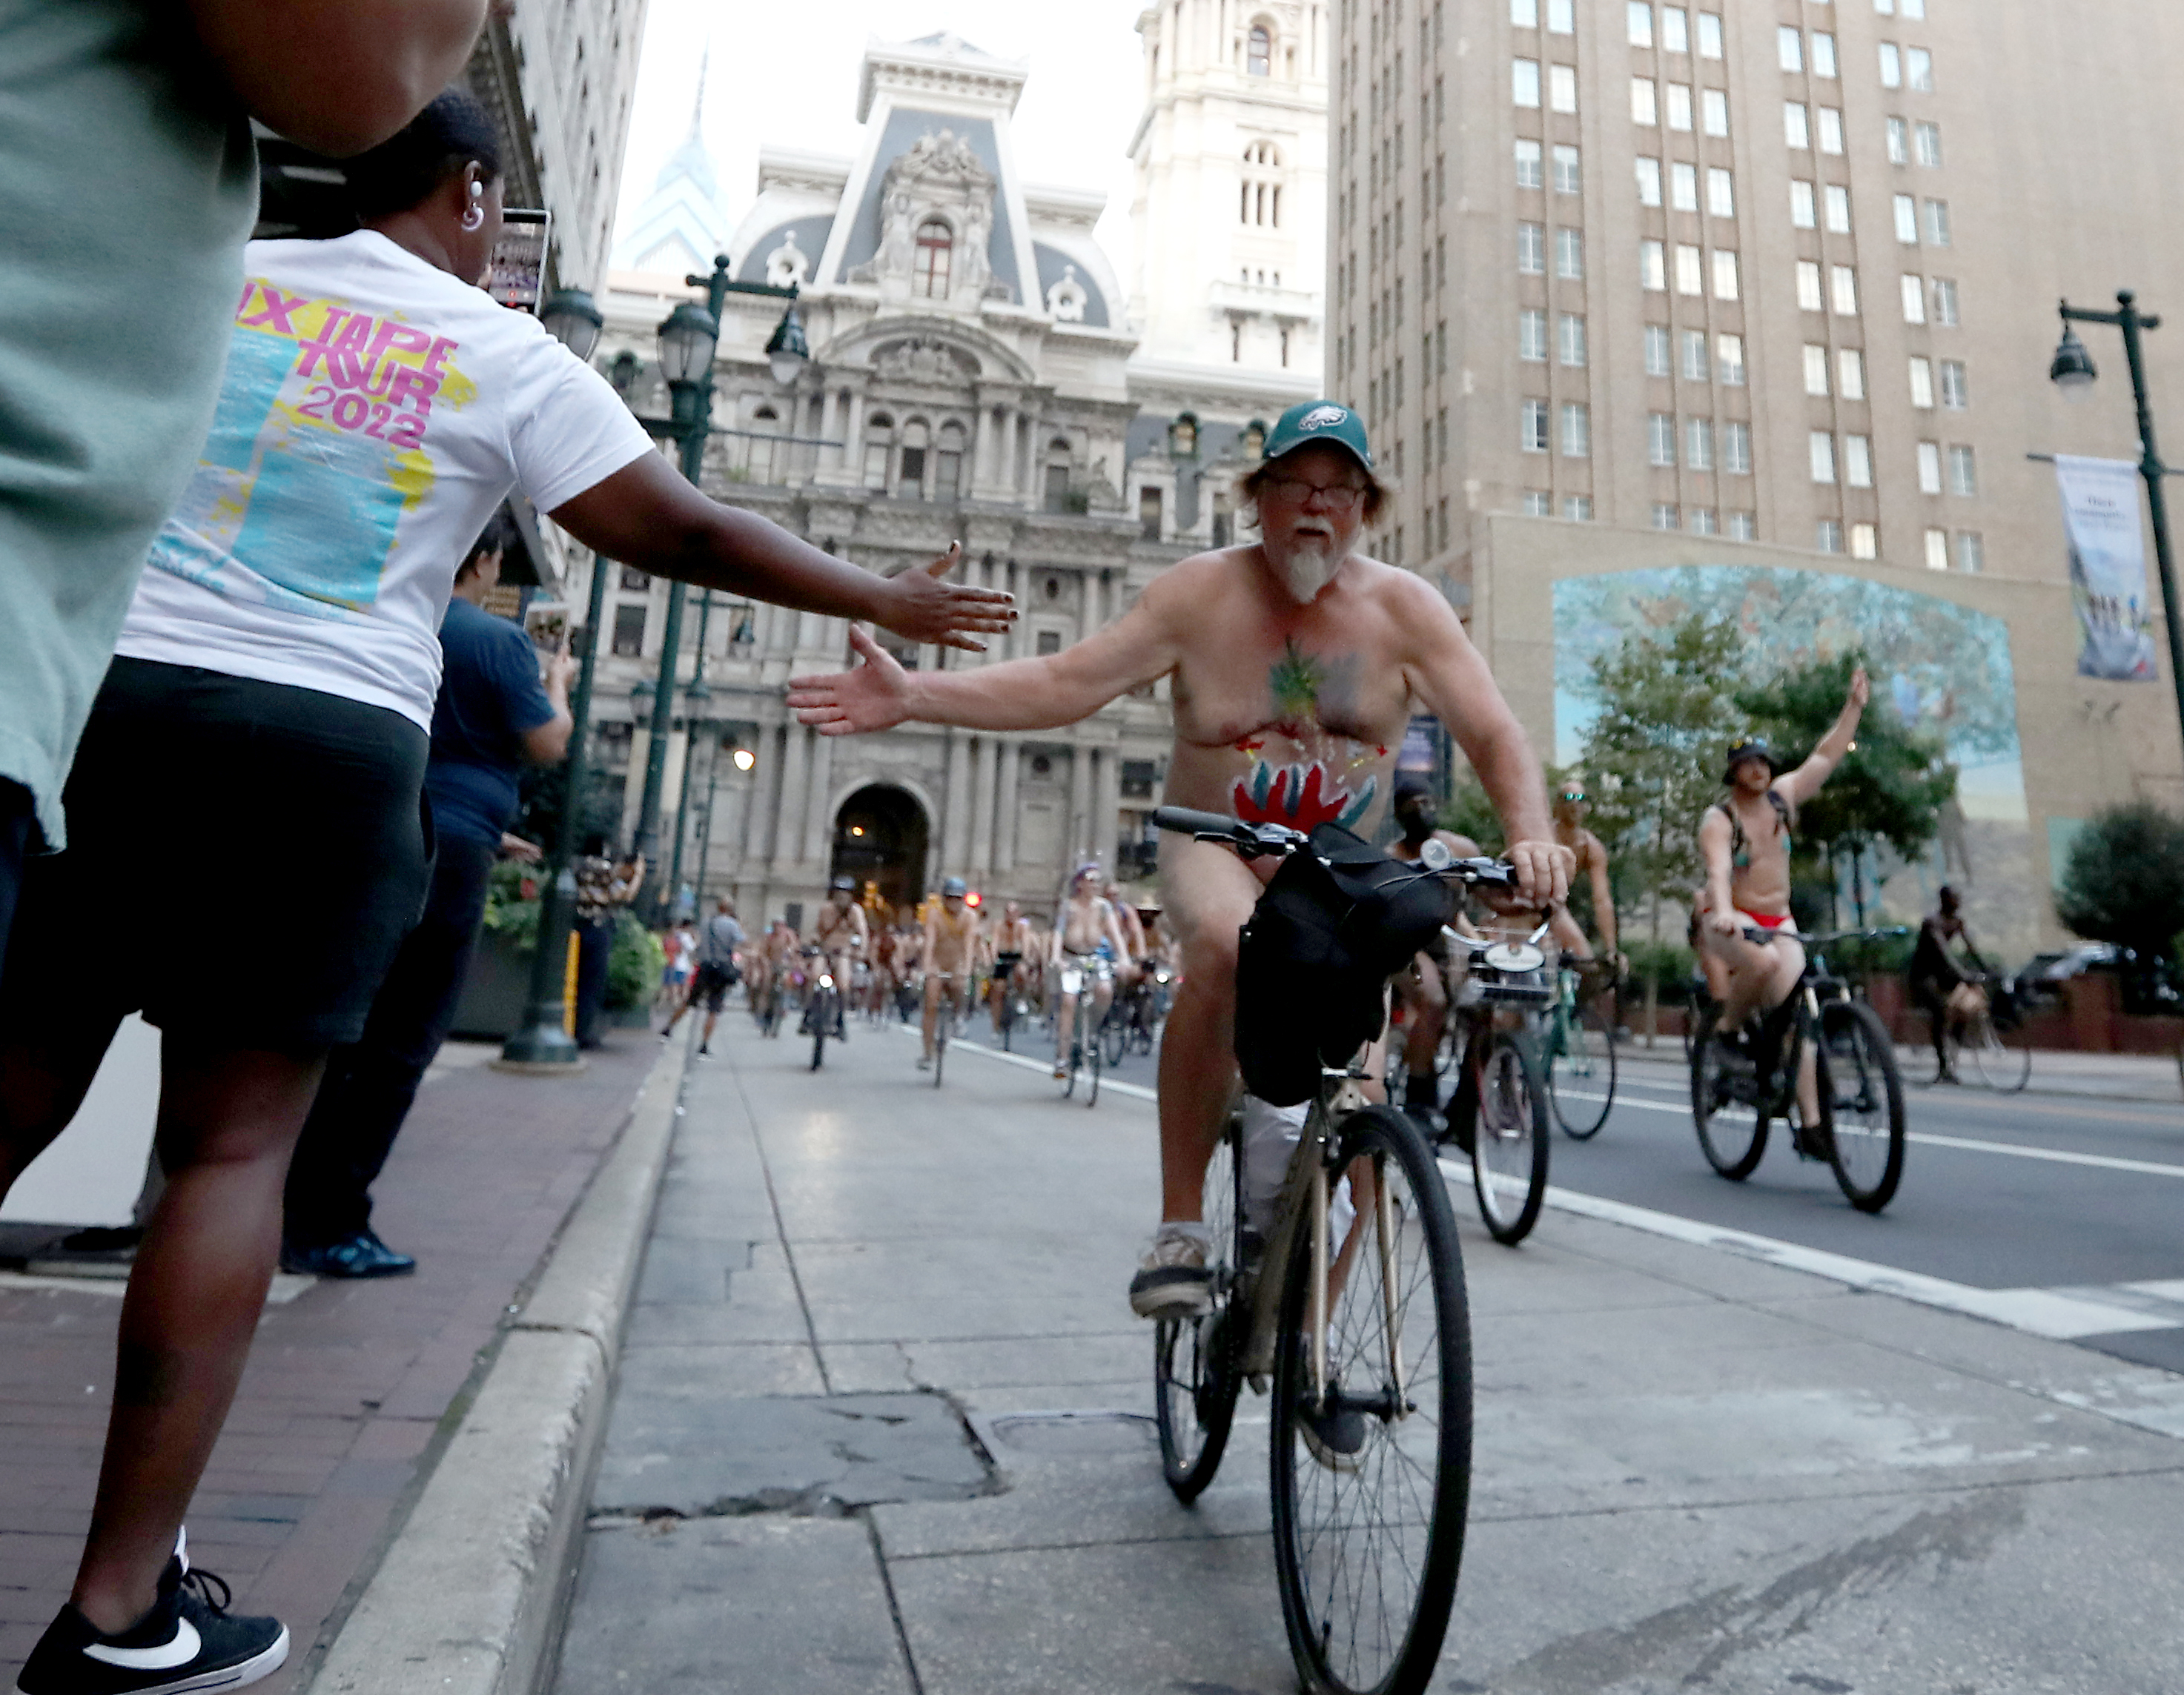 People ride bikes along Market Street in Philadelphia during the Philly Naked Bike Ride, Saturday, Aug. 27, 2022.